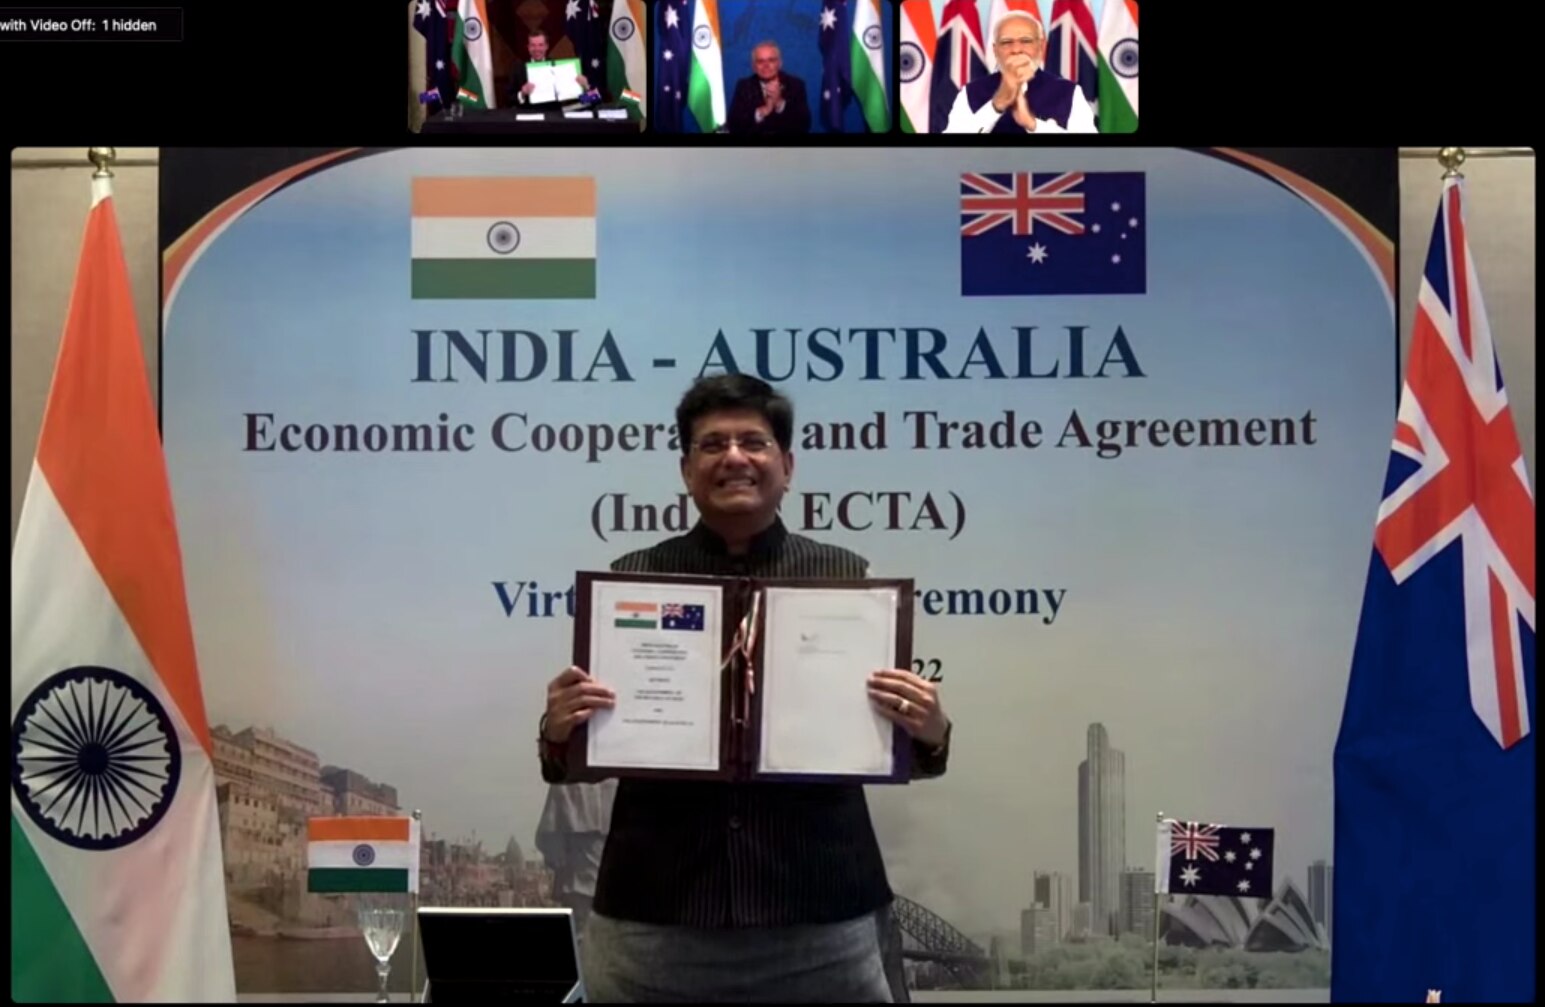 India's trade minister holds up a signed document. In other screens, Tehan does the same and Morrison and Modi applaud